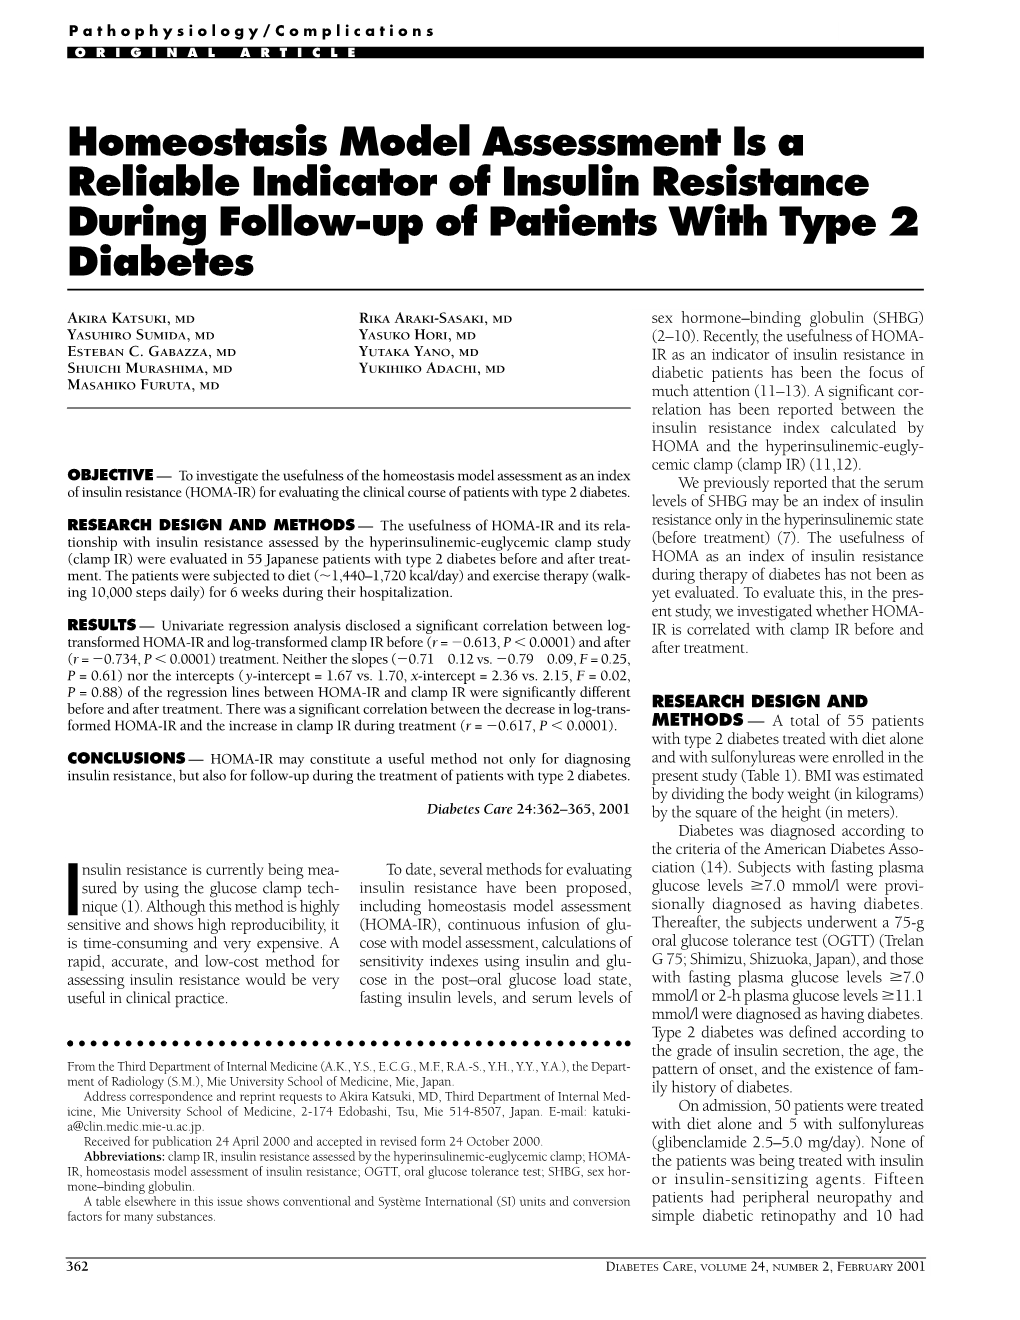 Homeostasis Model Assessment Is a Reliable Indicator of Insulin Resistance During Follow-Up of Patients with Type 2 Diabetes